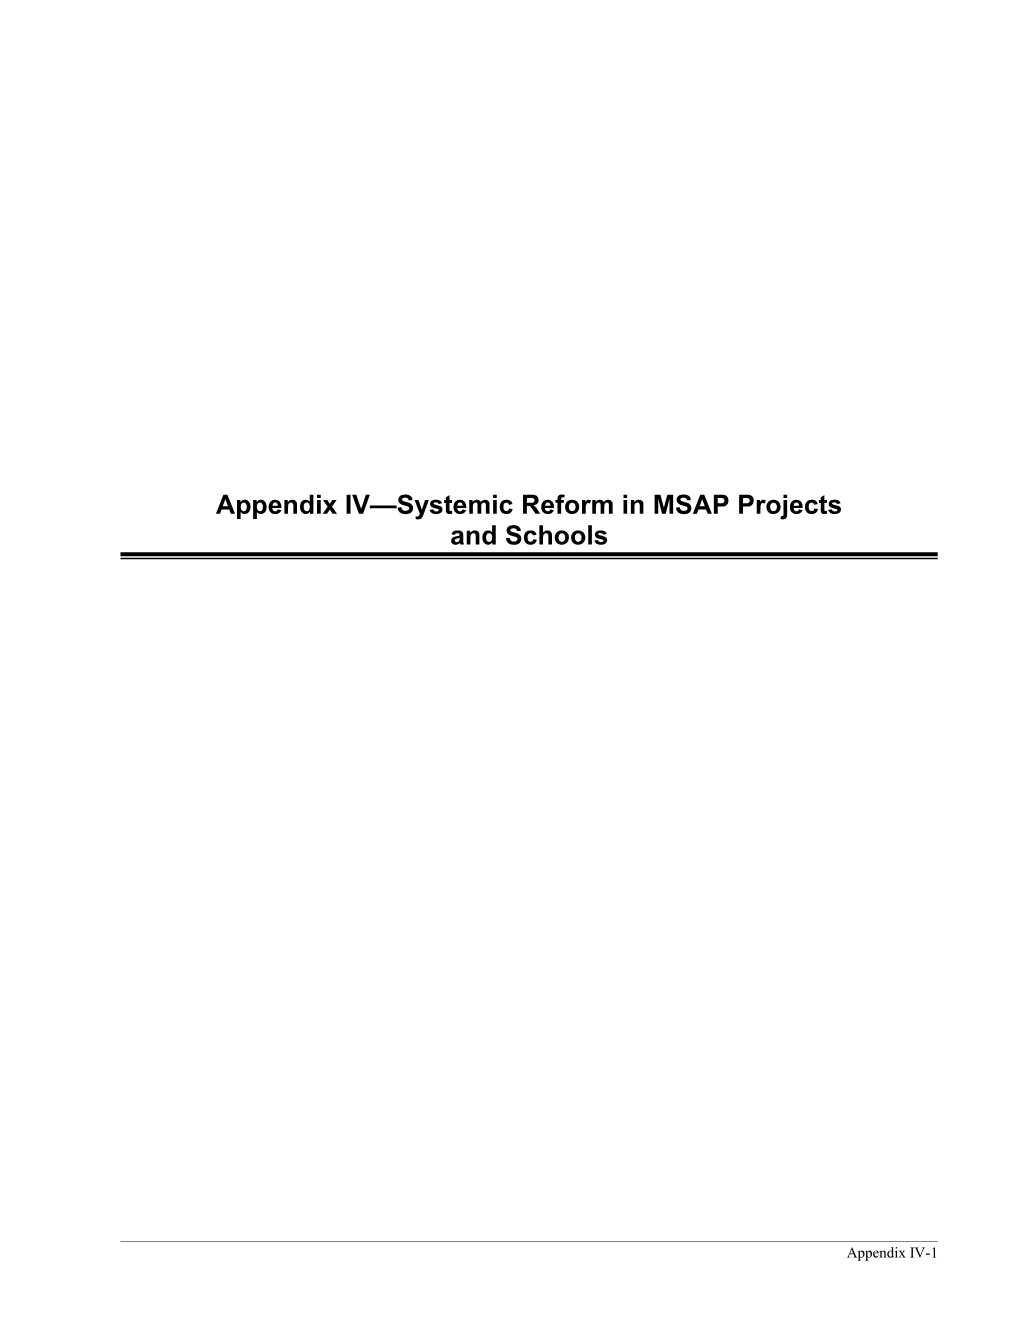 Appendix IV Systemic Reform in MSAP Projects